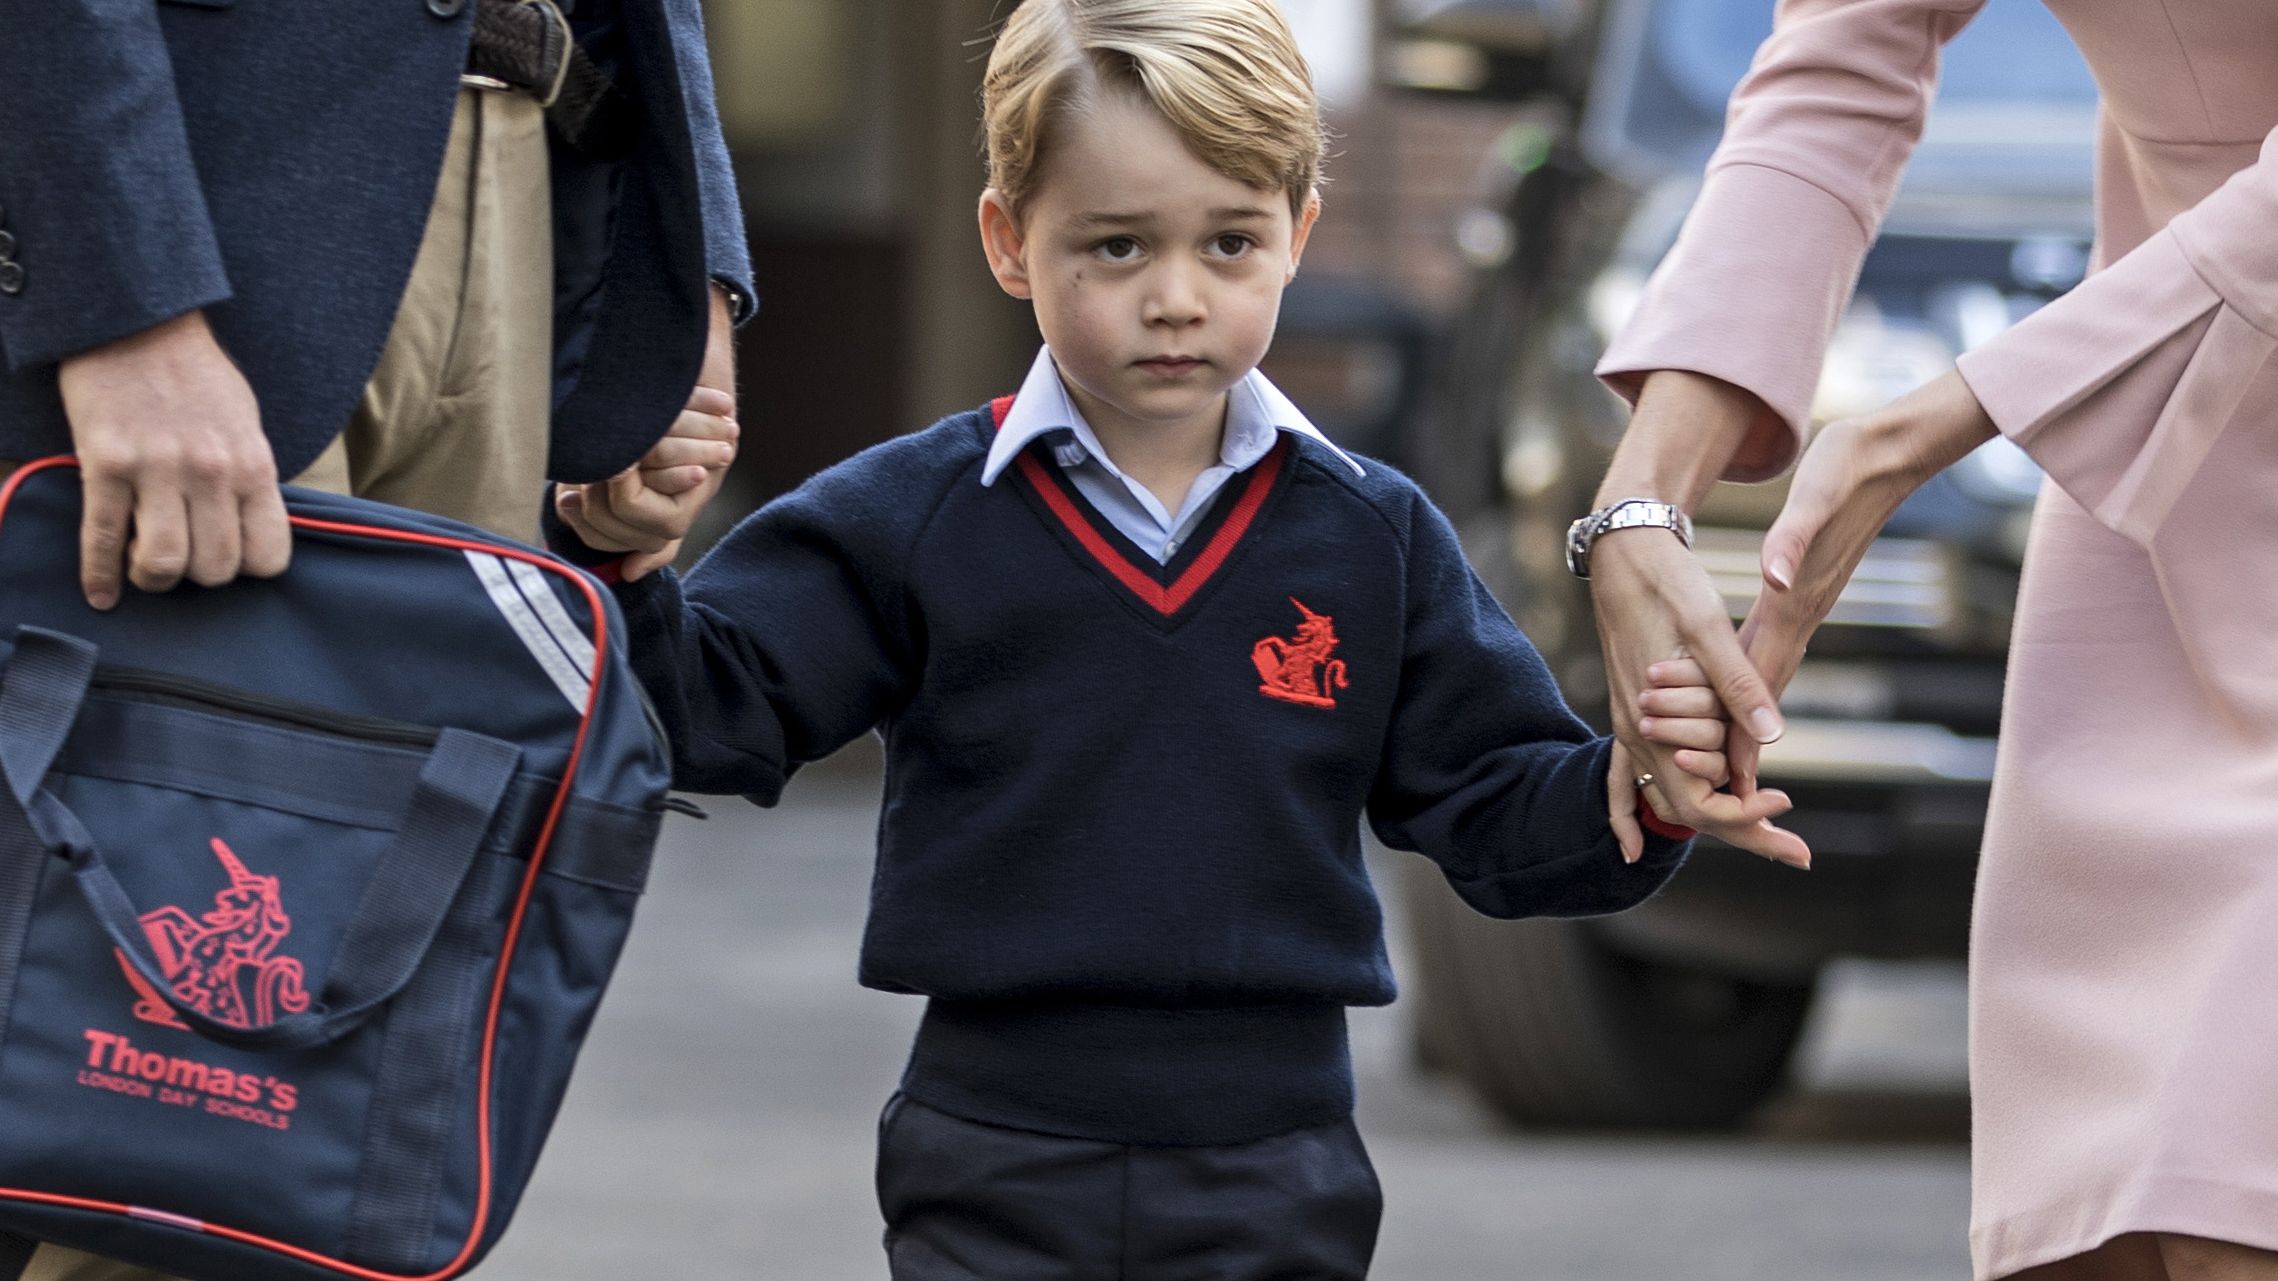 Prince George in 2017 on his first day of school, when life was simpler.